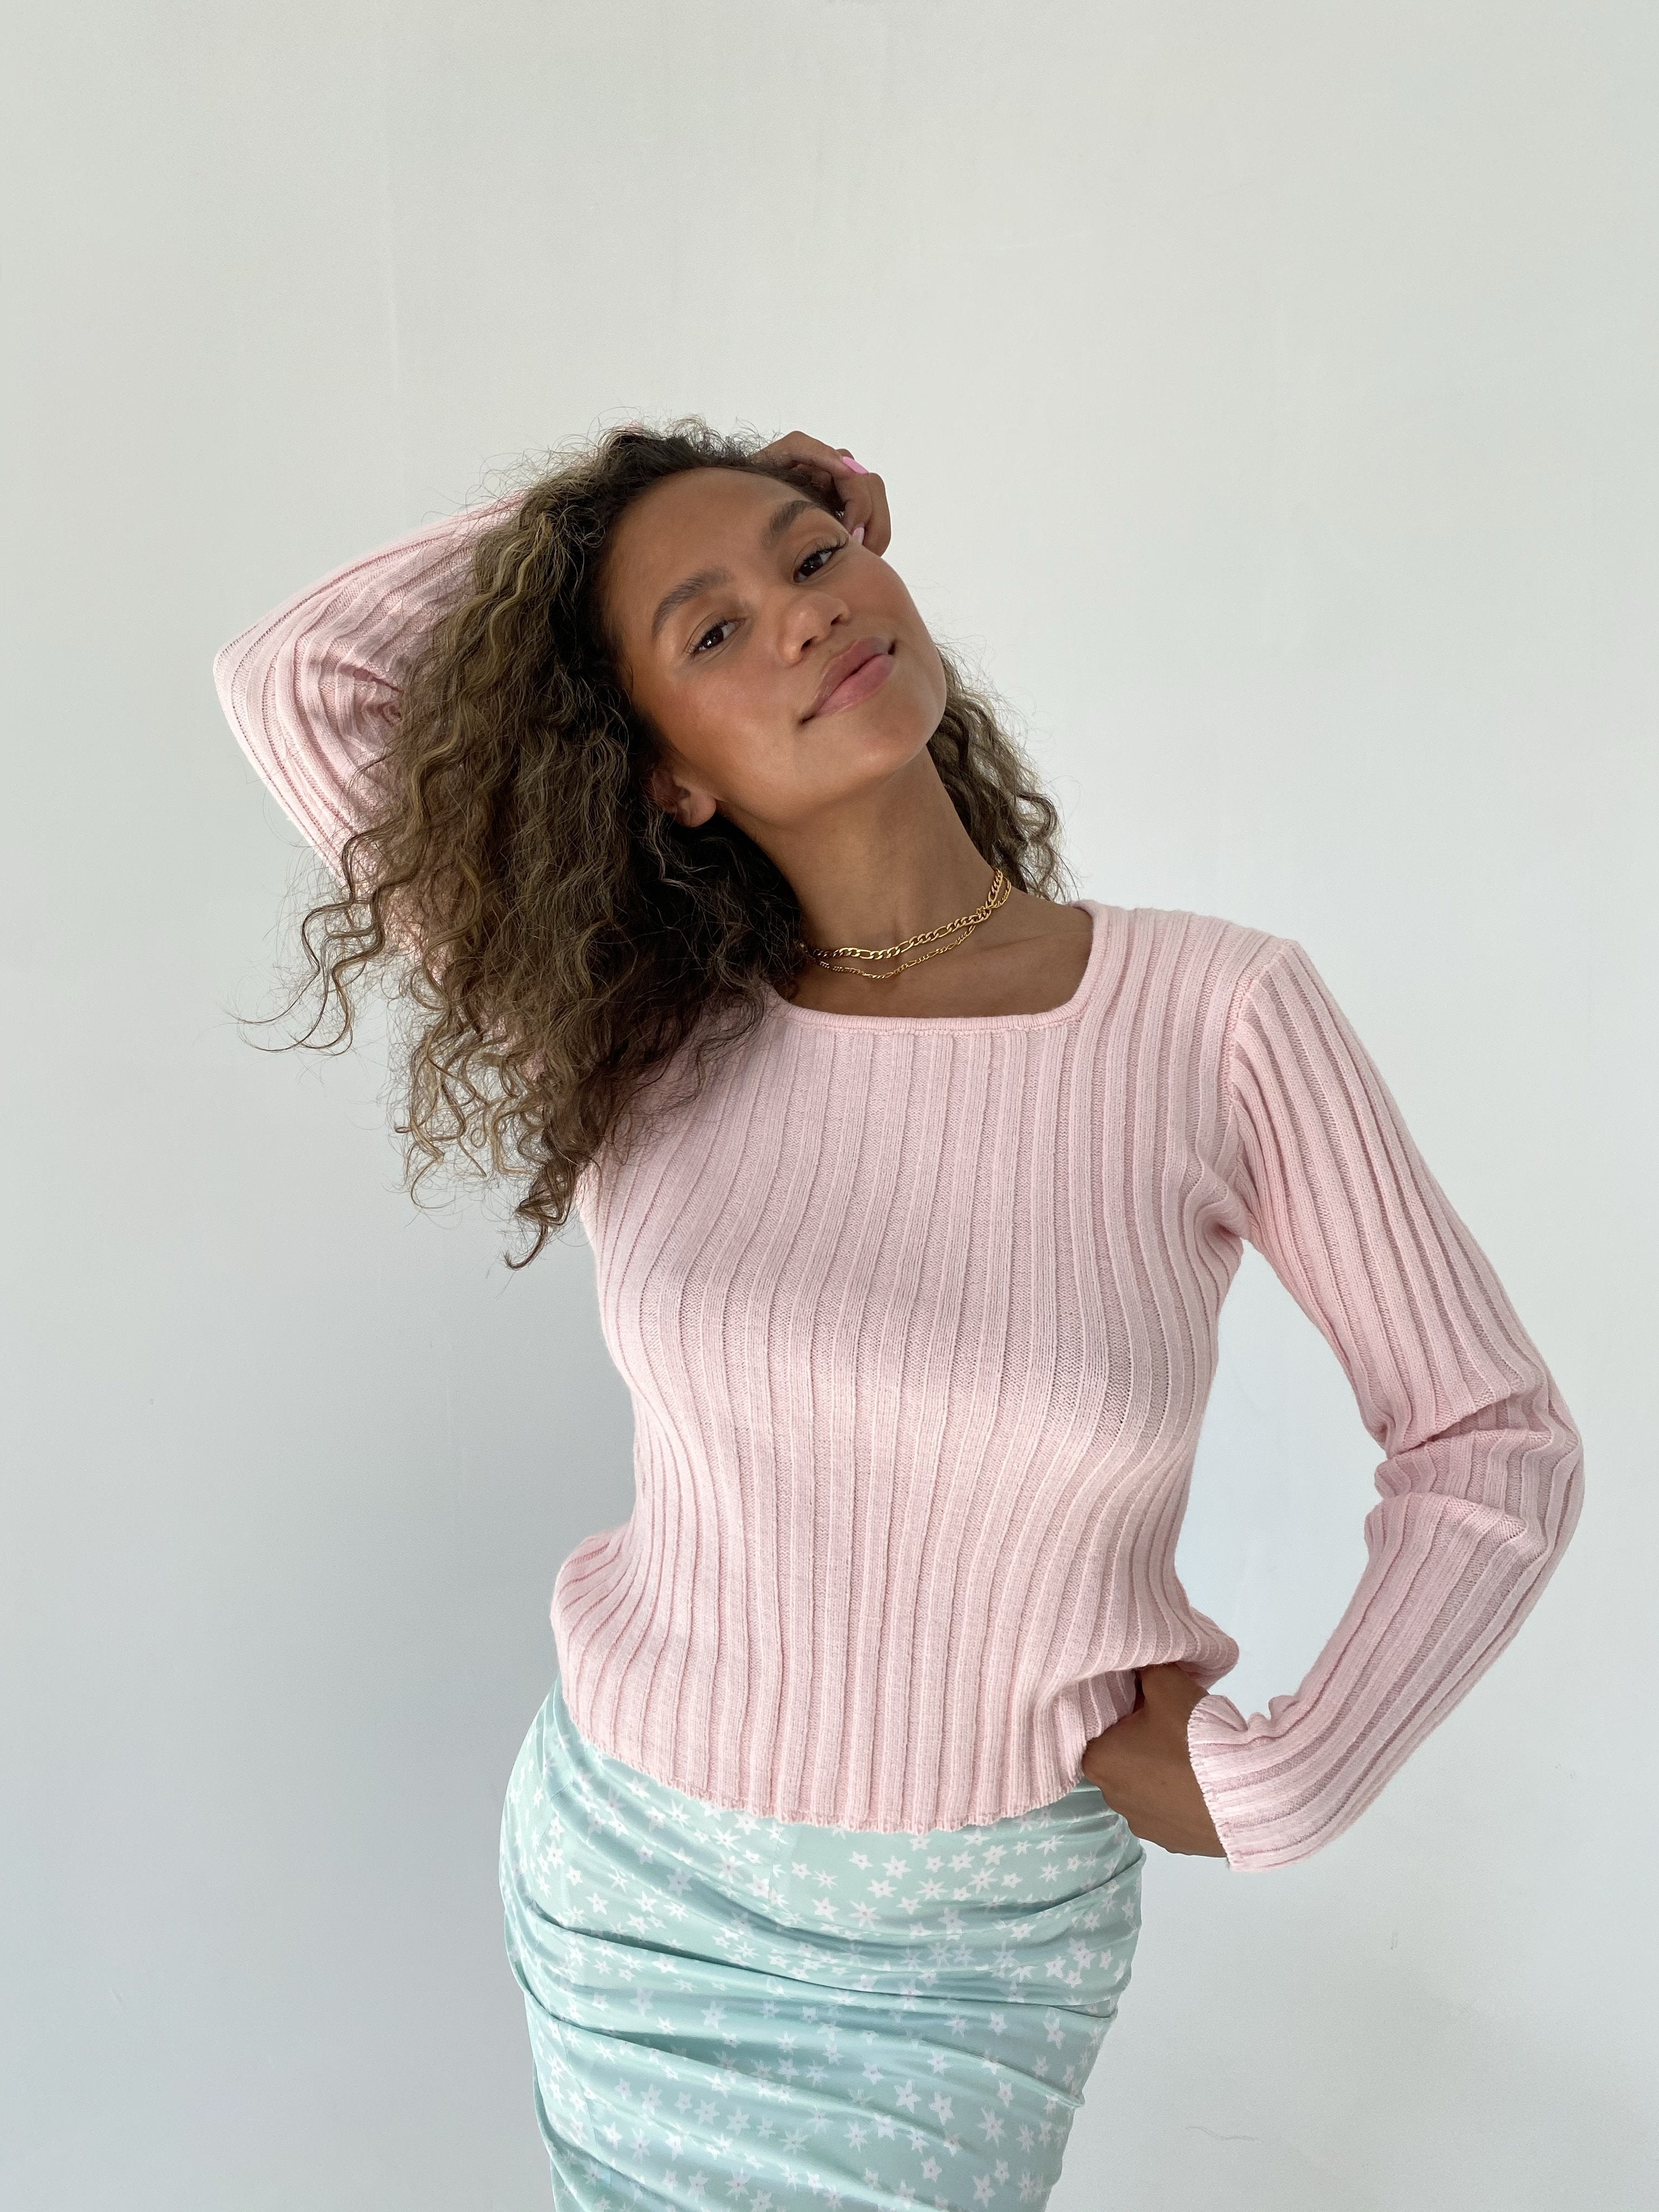 Go south knit - baby pink top May 